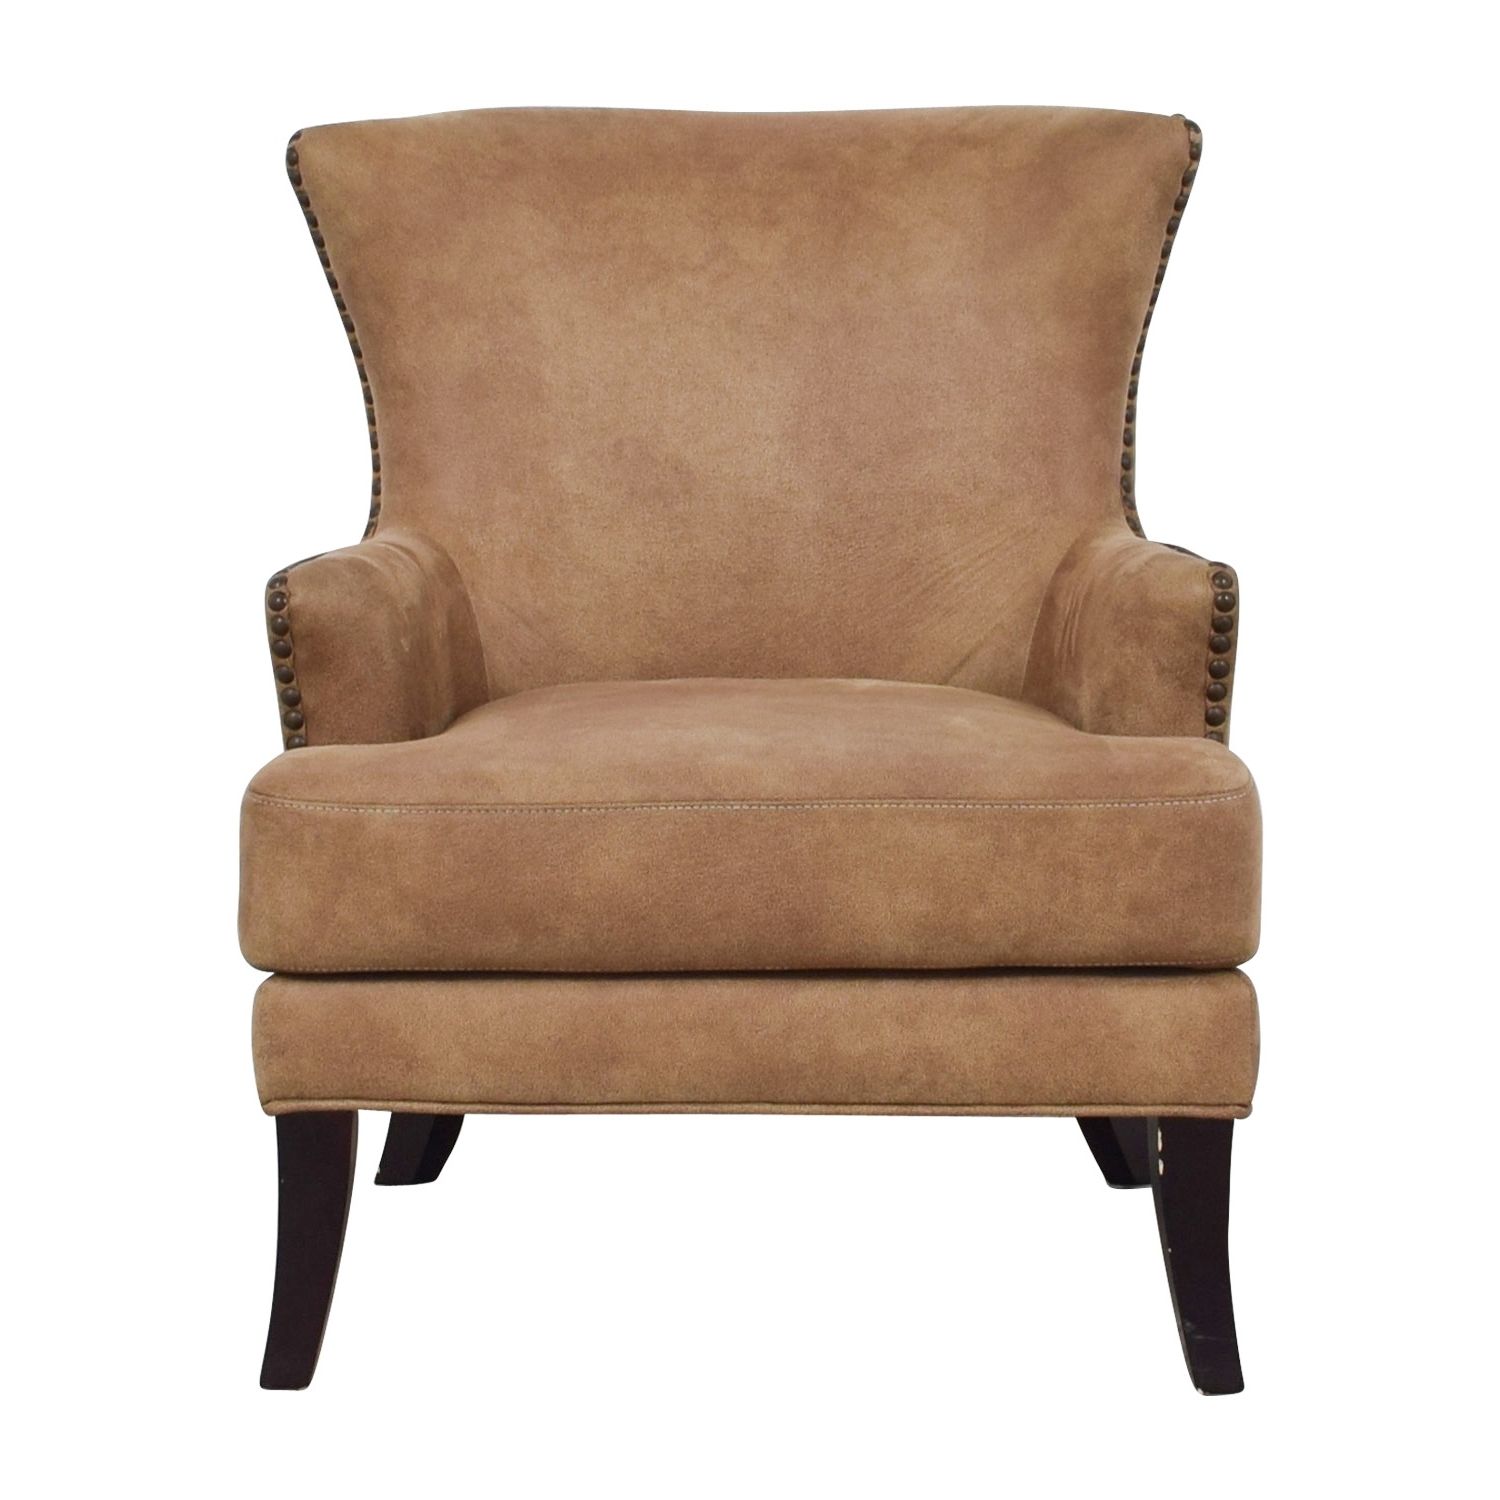 [%88% Off – Joss & Main Joss & Main Nola Brown Nailhead Arm Chair / Chairs Pertaining To Best And Newest Joss Side Chairs|joss Side Chairs Throughout 2017 88% Off – Joss & Main Joss & Main Nola Brown Nailhead Arm Chair / Chairs|best And Newest Joss Side Chairs Pertaining To 88% Off – Joss & Main Joss & Main Nola Brown Nailhead Arm Chair / Chairs|famous 88% Off – Joss & Main Joss & Main Nola Brown Nailhead Arm Chair / Chairs Within Joss Side Chairs%] (Photo 13 of 20)